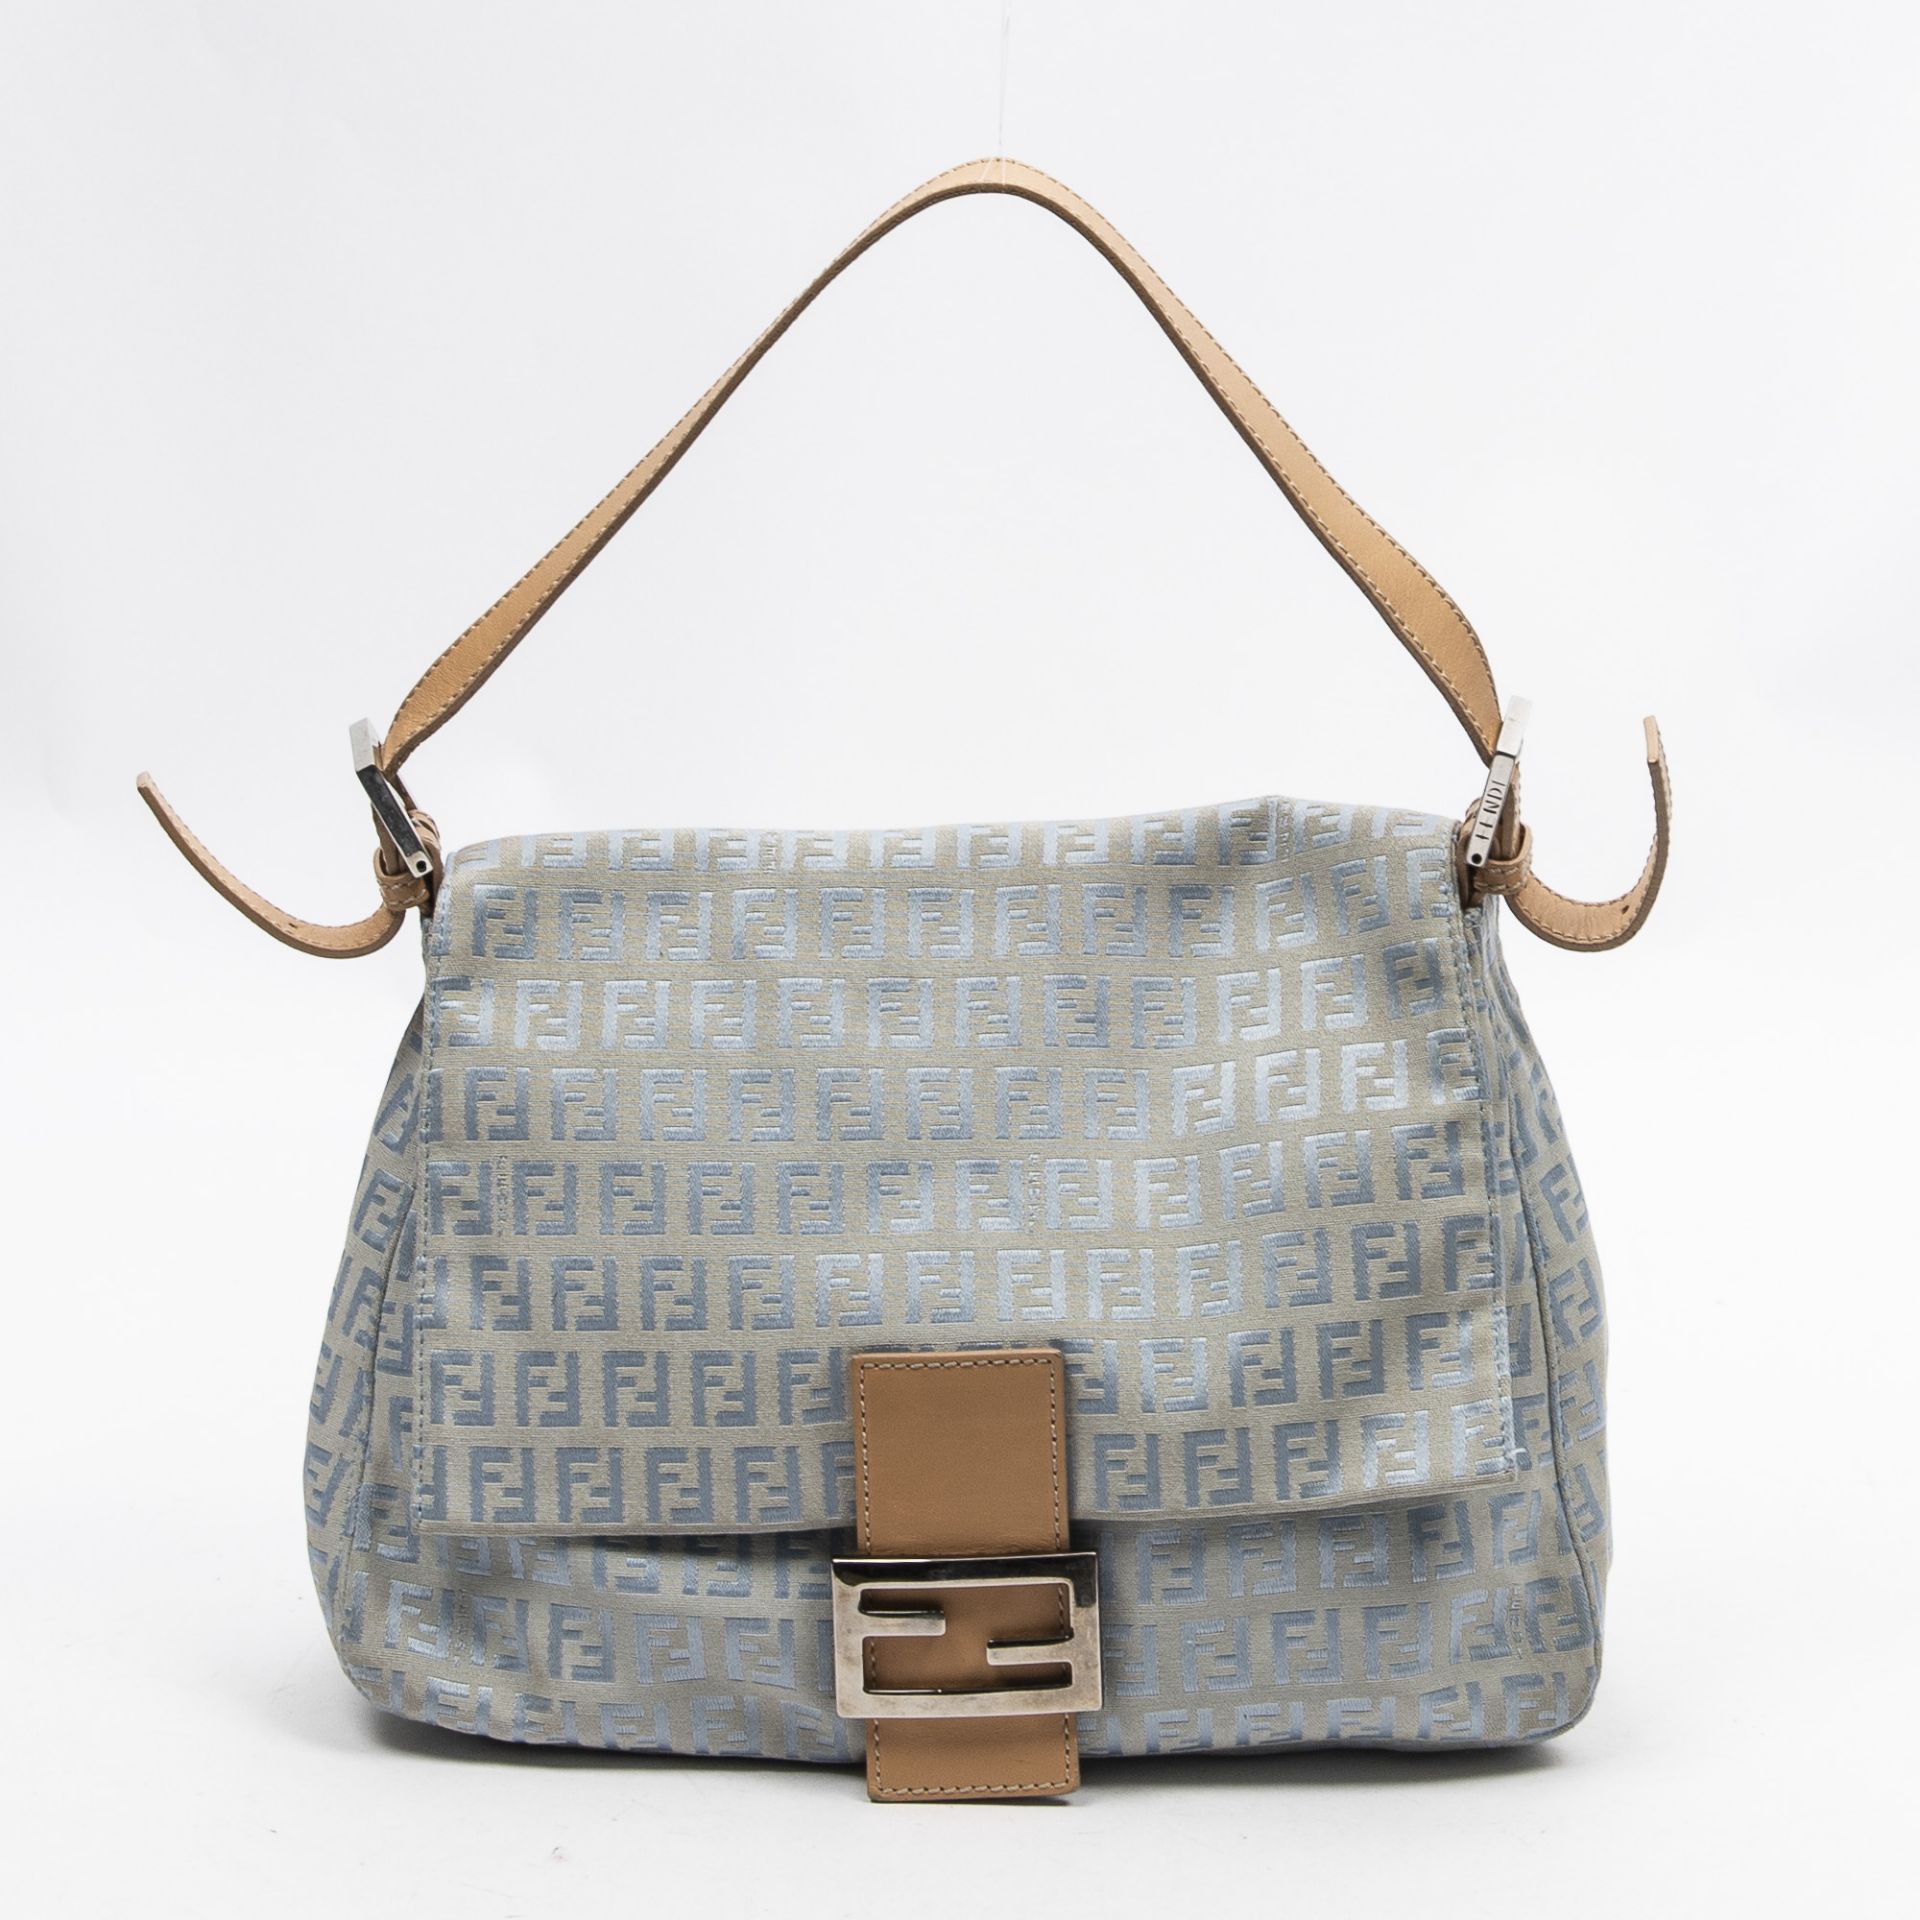 RRP £1,000.00 Lot To Contain 1 Fendi Canvas Mamma Forever Shoulder Bag In Light Blue/Beige - 29*19*